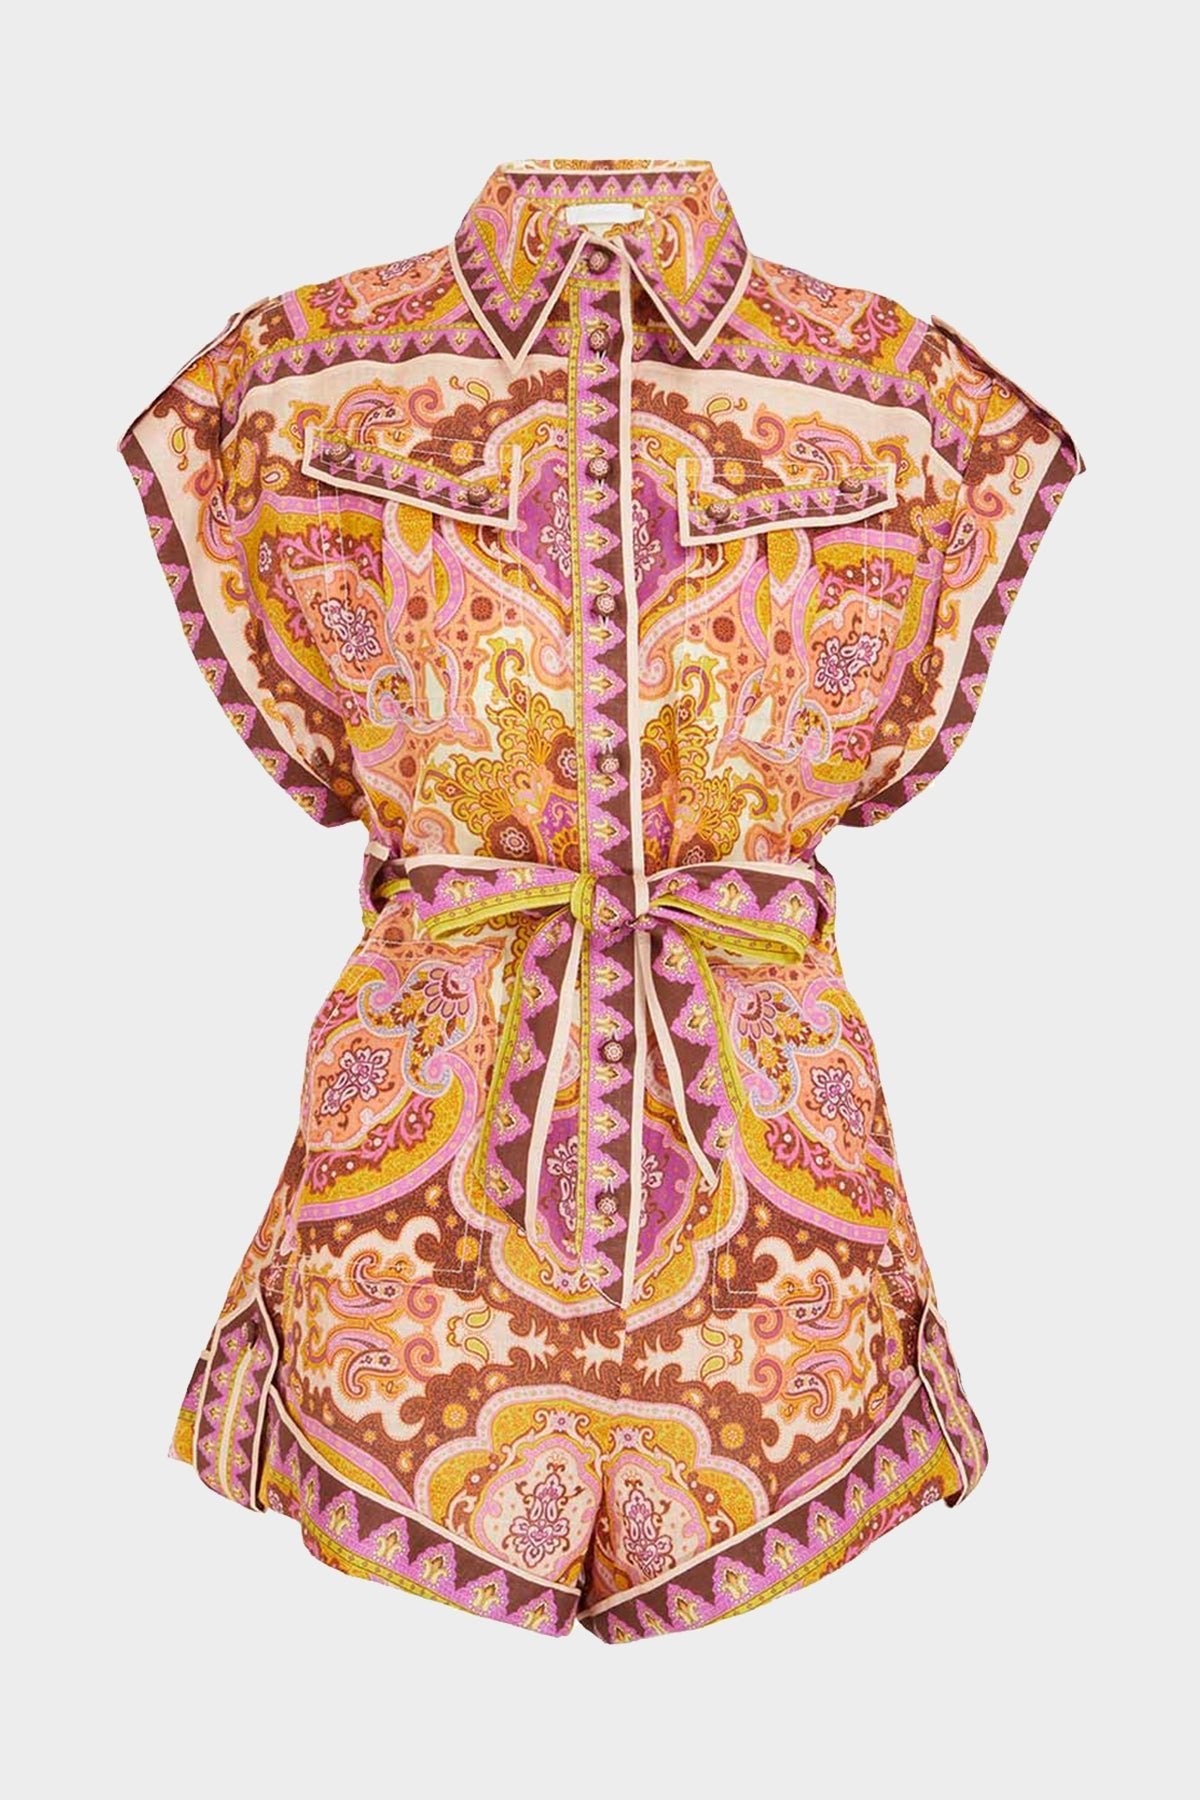 Halcyon Cuffed Playsuit in Mustard Pink Paisley - shop-olivia.com